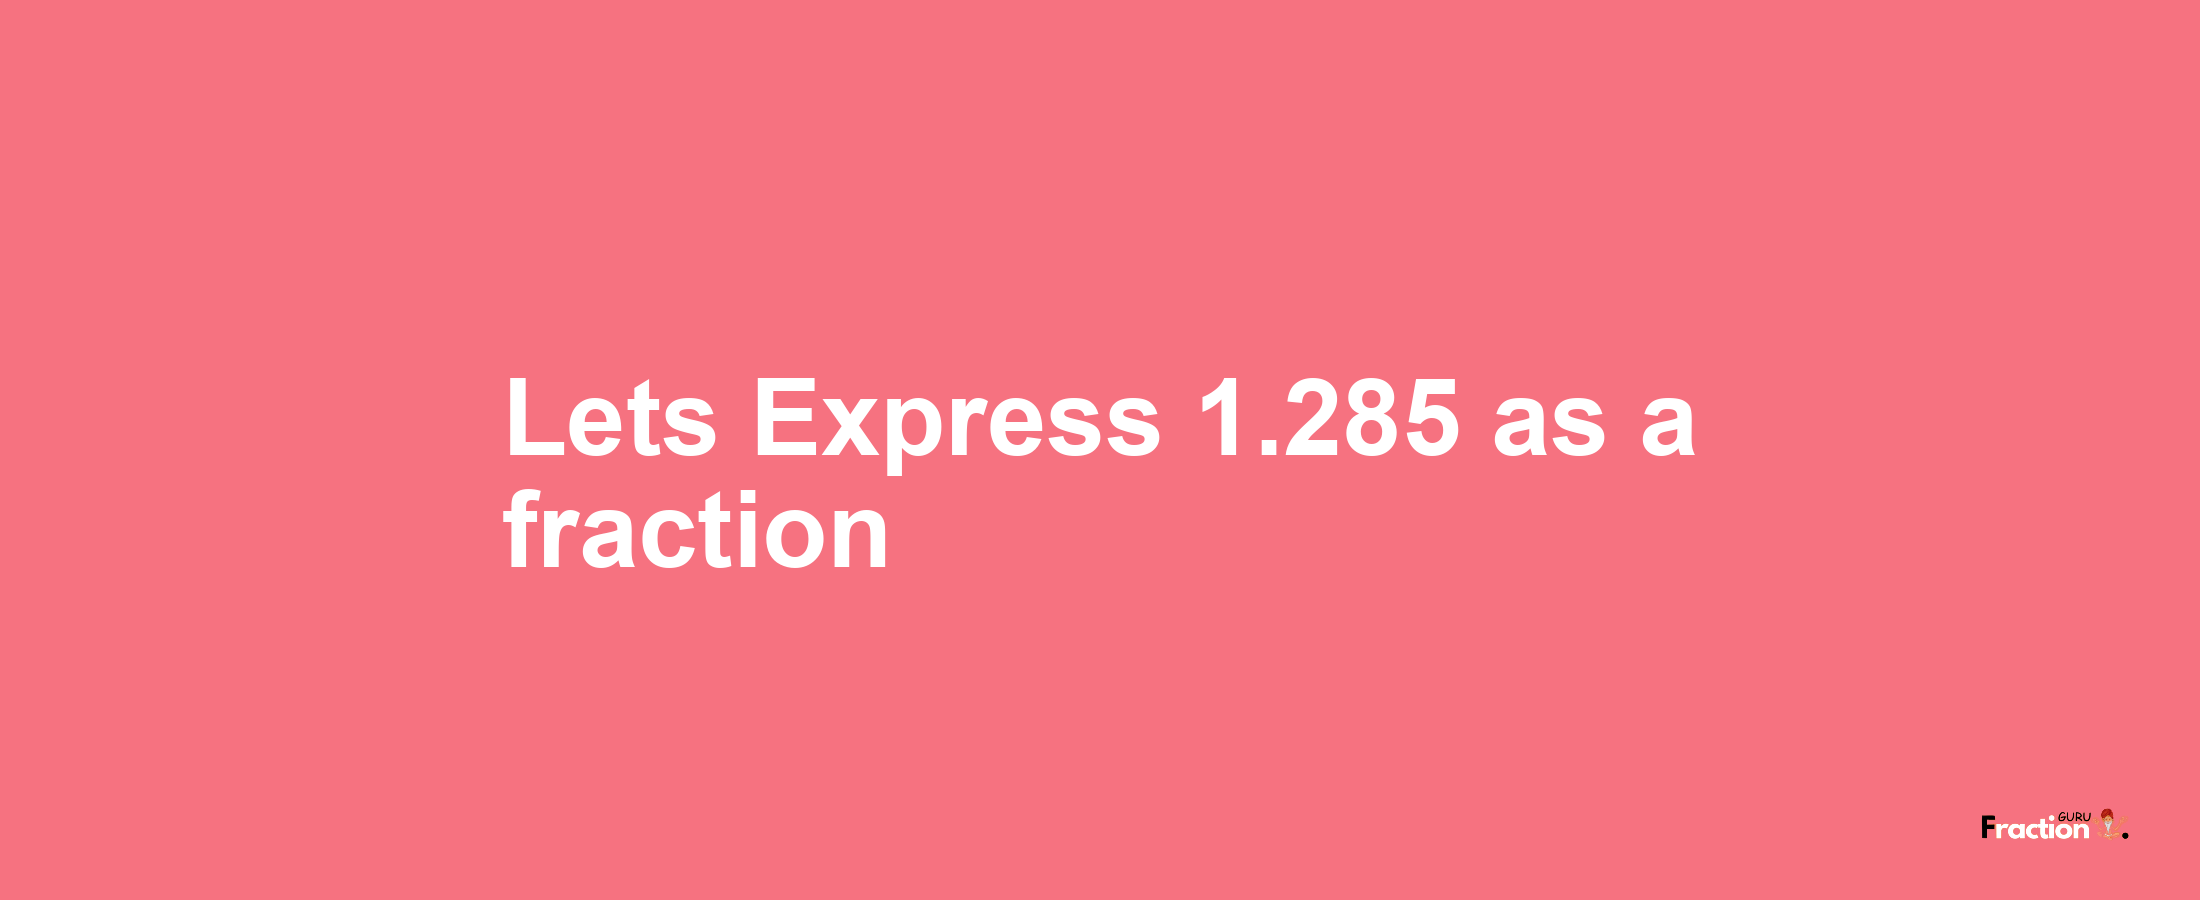 Lets Express 1.285 as afraction